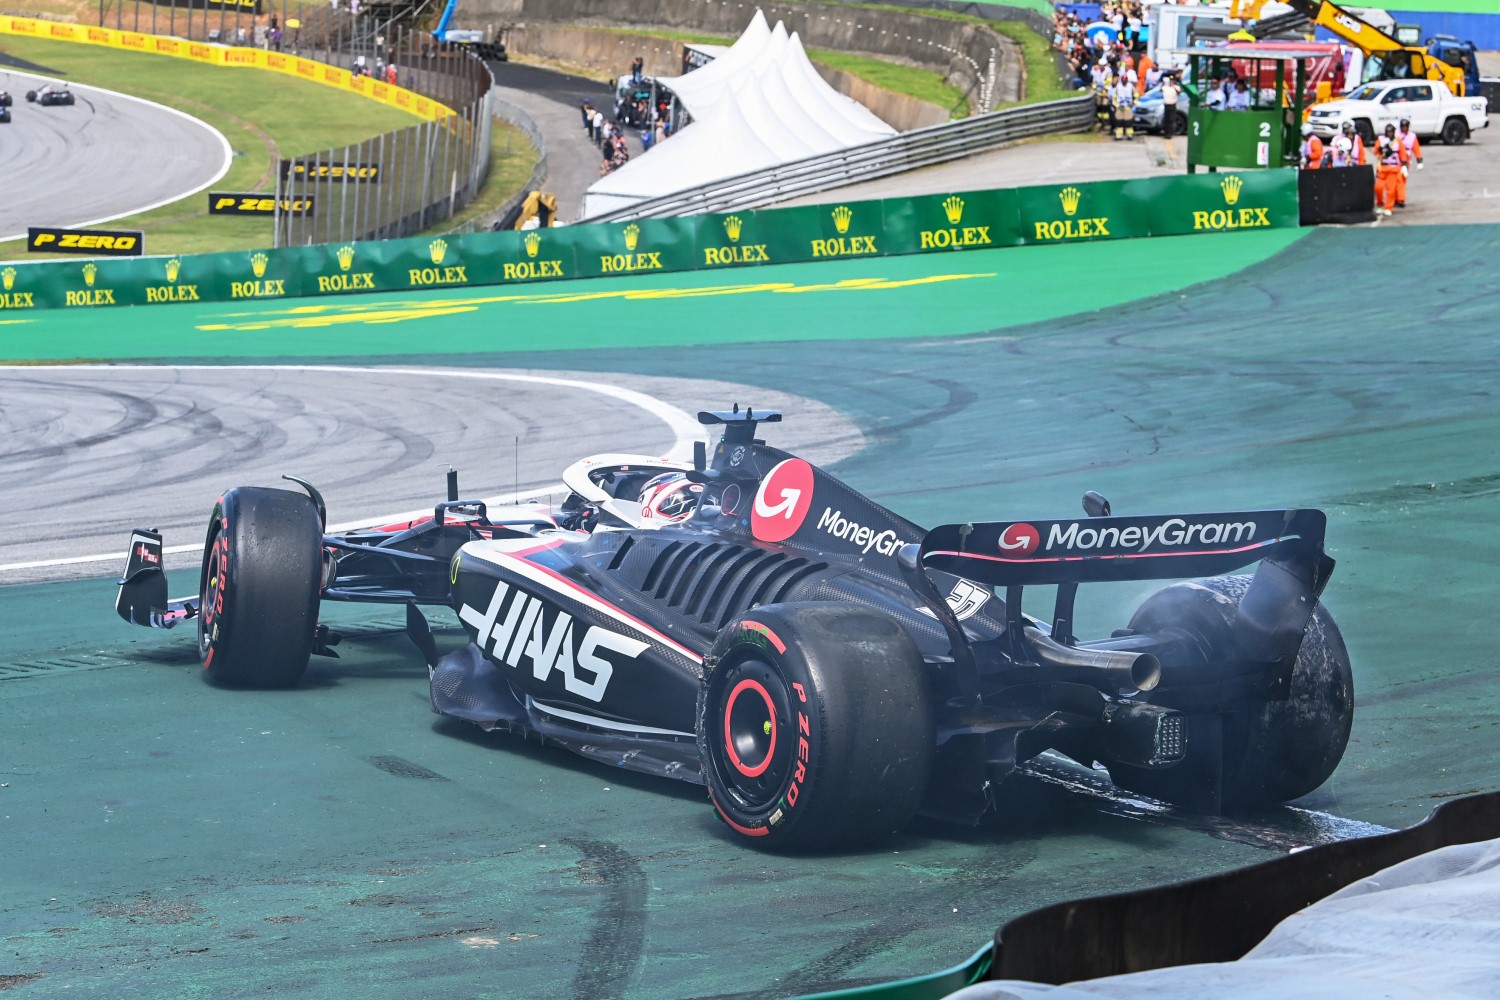 Kevin Magnussen, Haas VF-23, crashes out at the start after contact with Alex Albon, Williams FW45 during the Brazilian GP at Autódromo José Carlos Pace on Sunday November 05, 2023 in Sao Paulo, Brazil. (Photo by Mark Sutton / LAT Images)